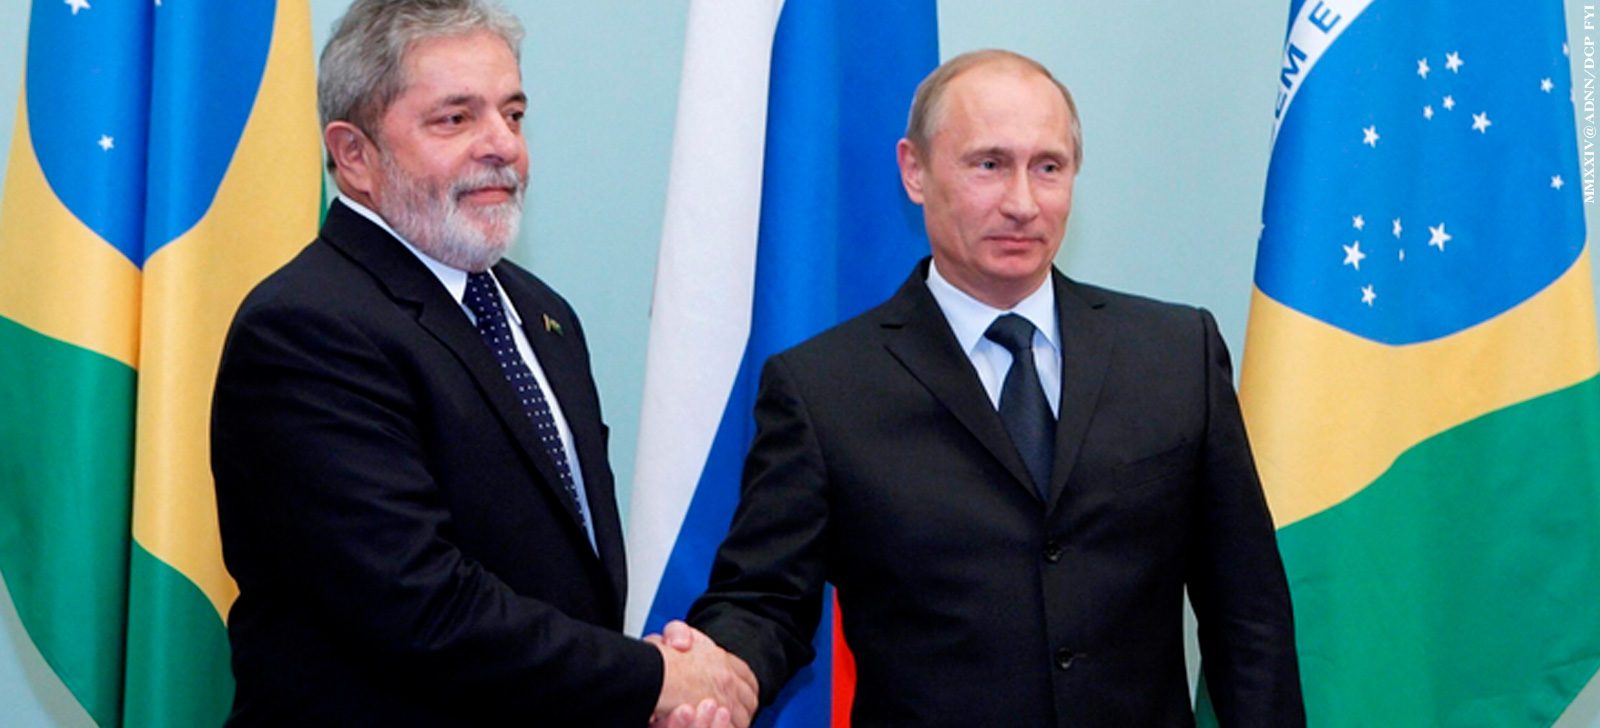 Brazil - Russia: Lula's government imposes secrecy on Petista's letter to Vladimir Putin